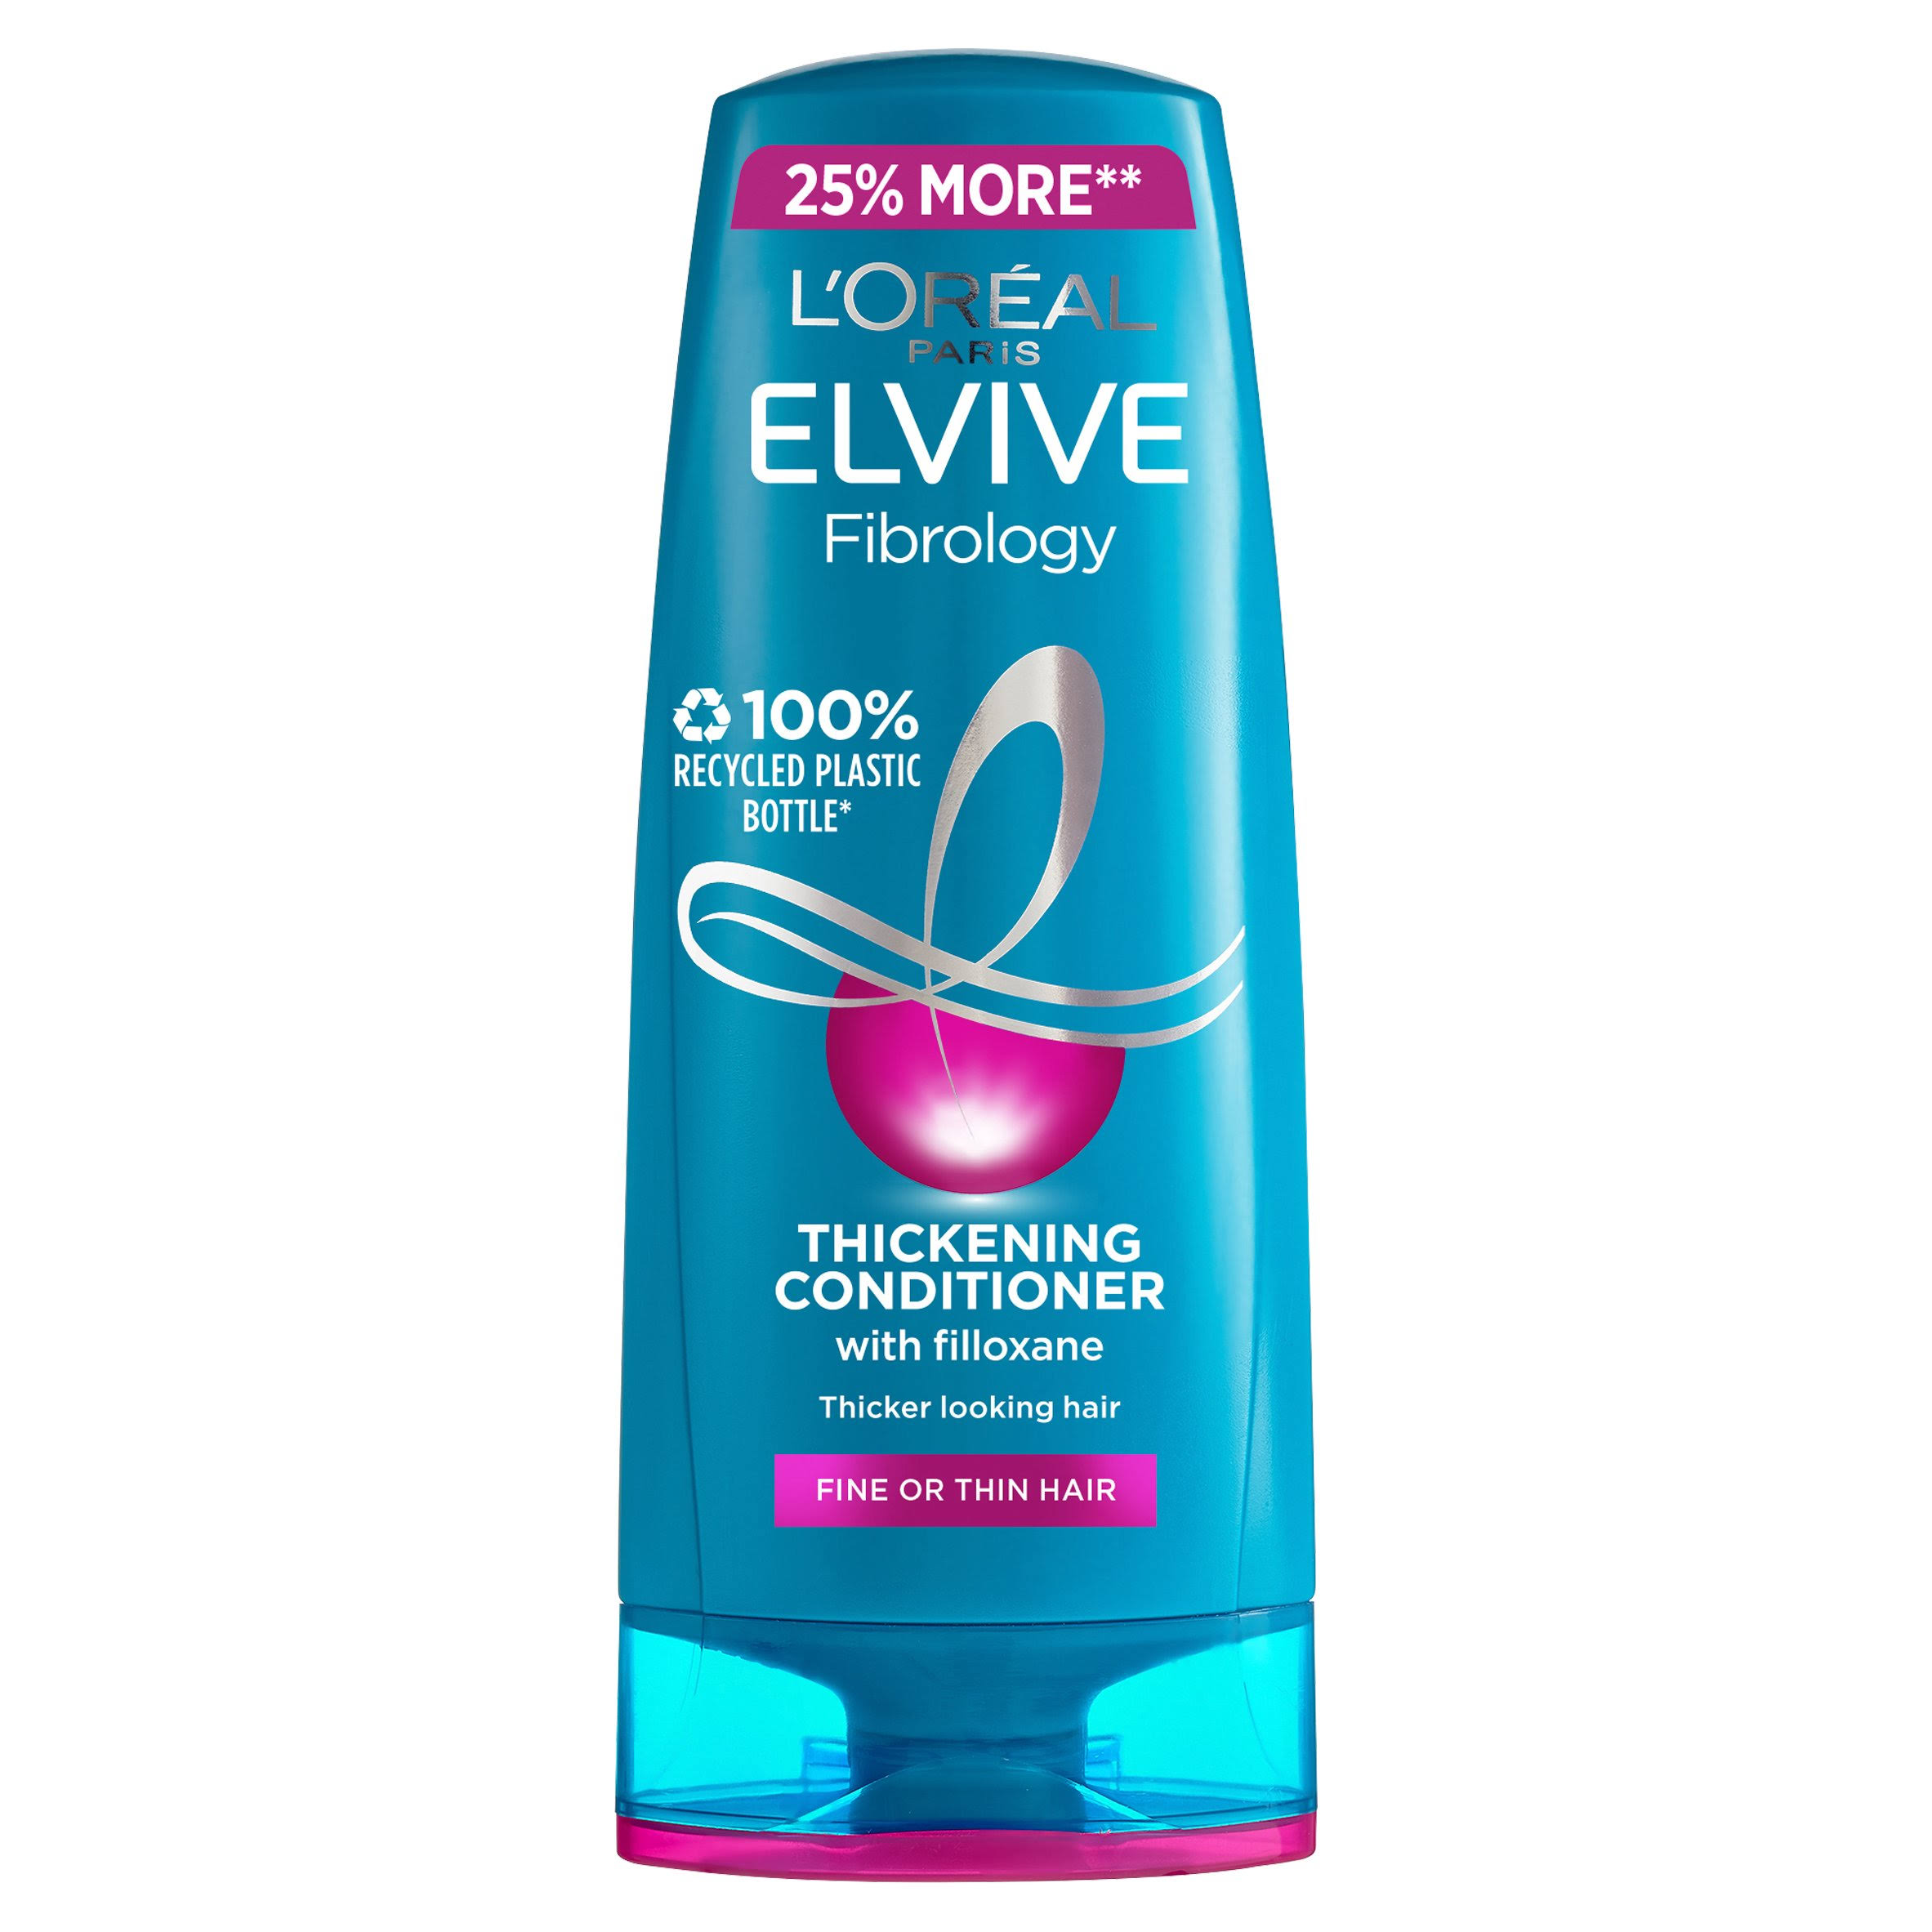 L'oreal Elvive Fibrology Thickening Conditioner 500Ml